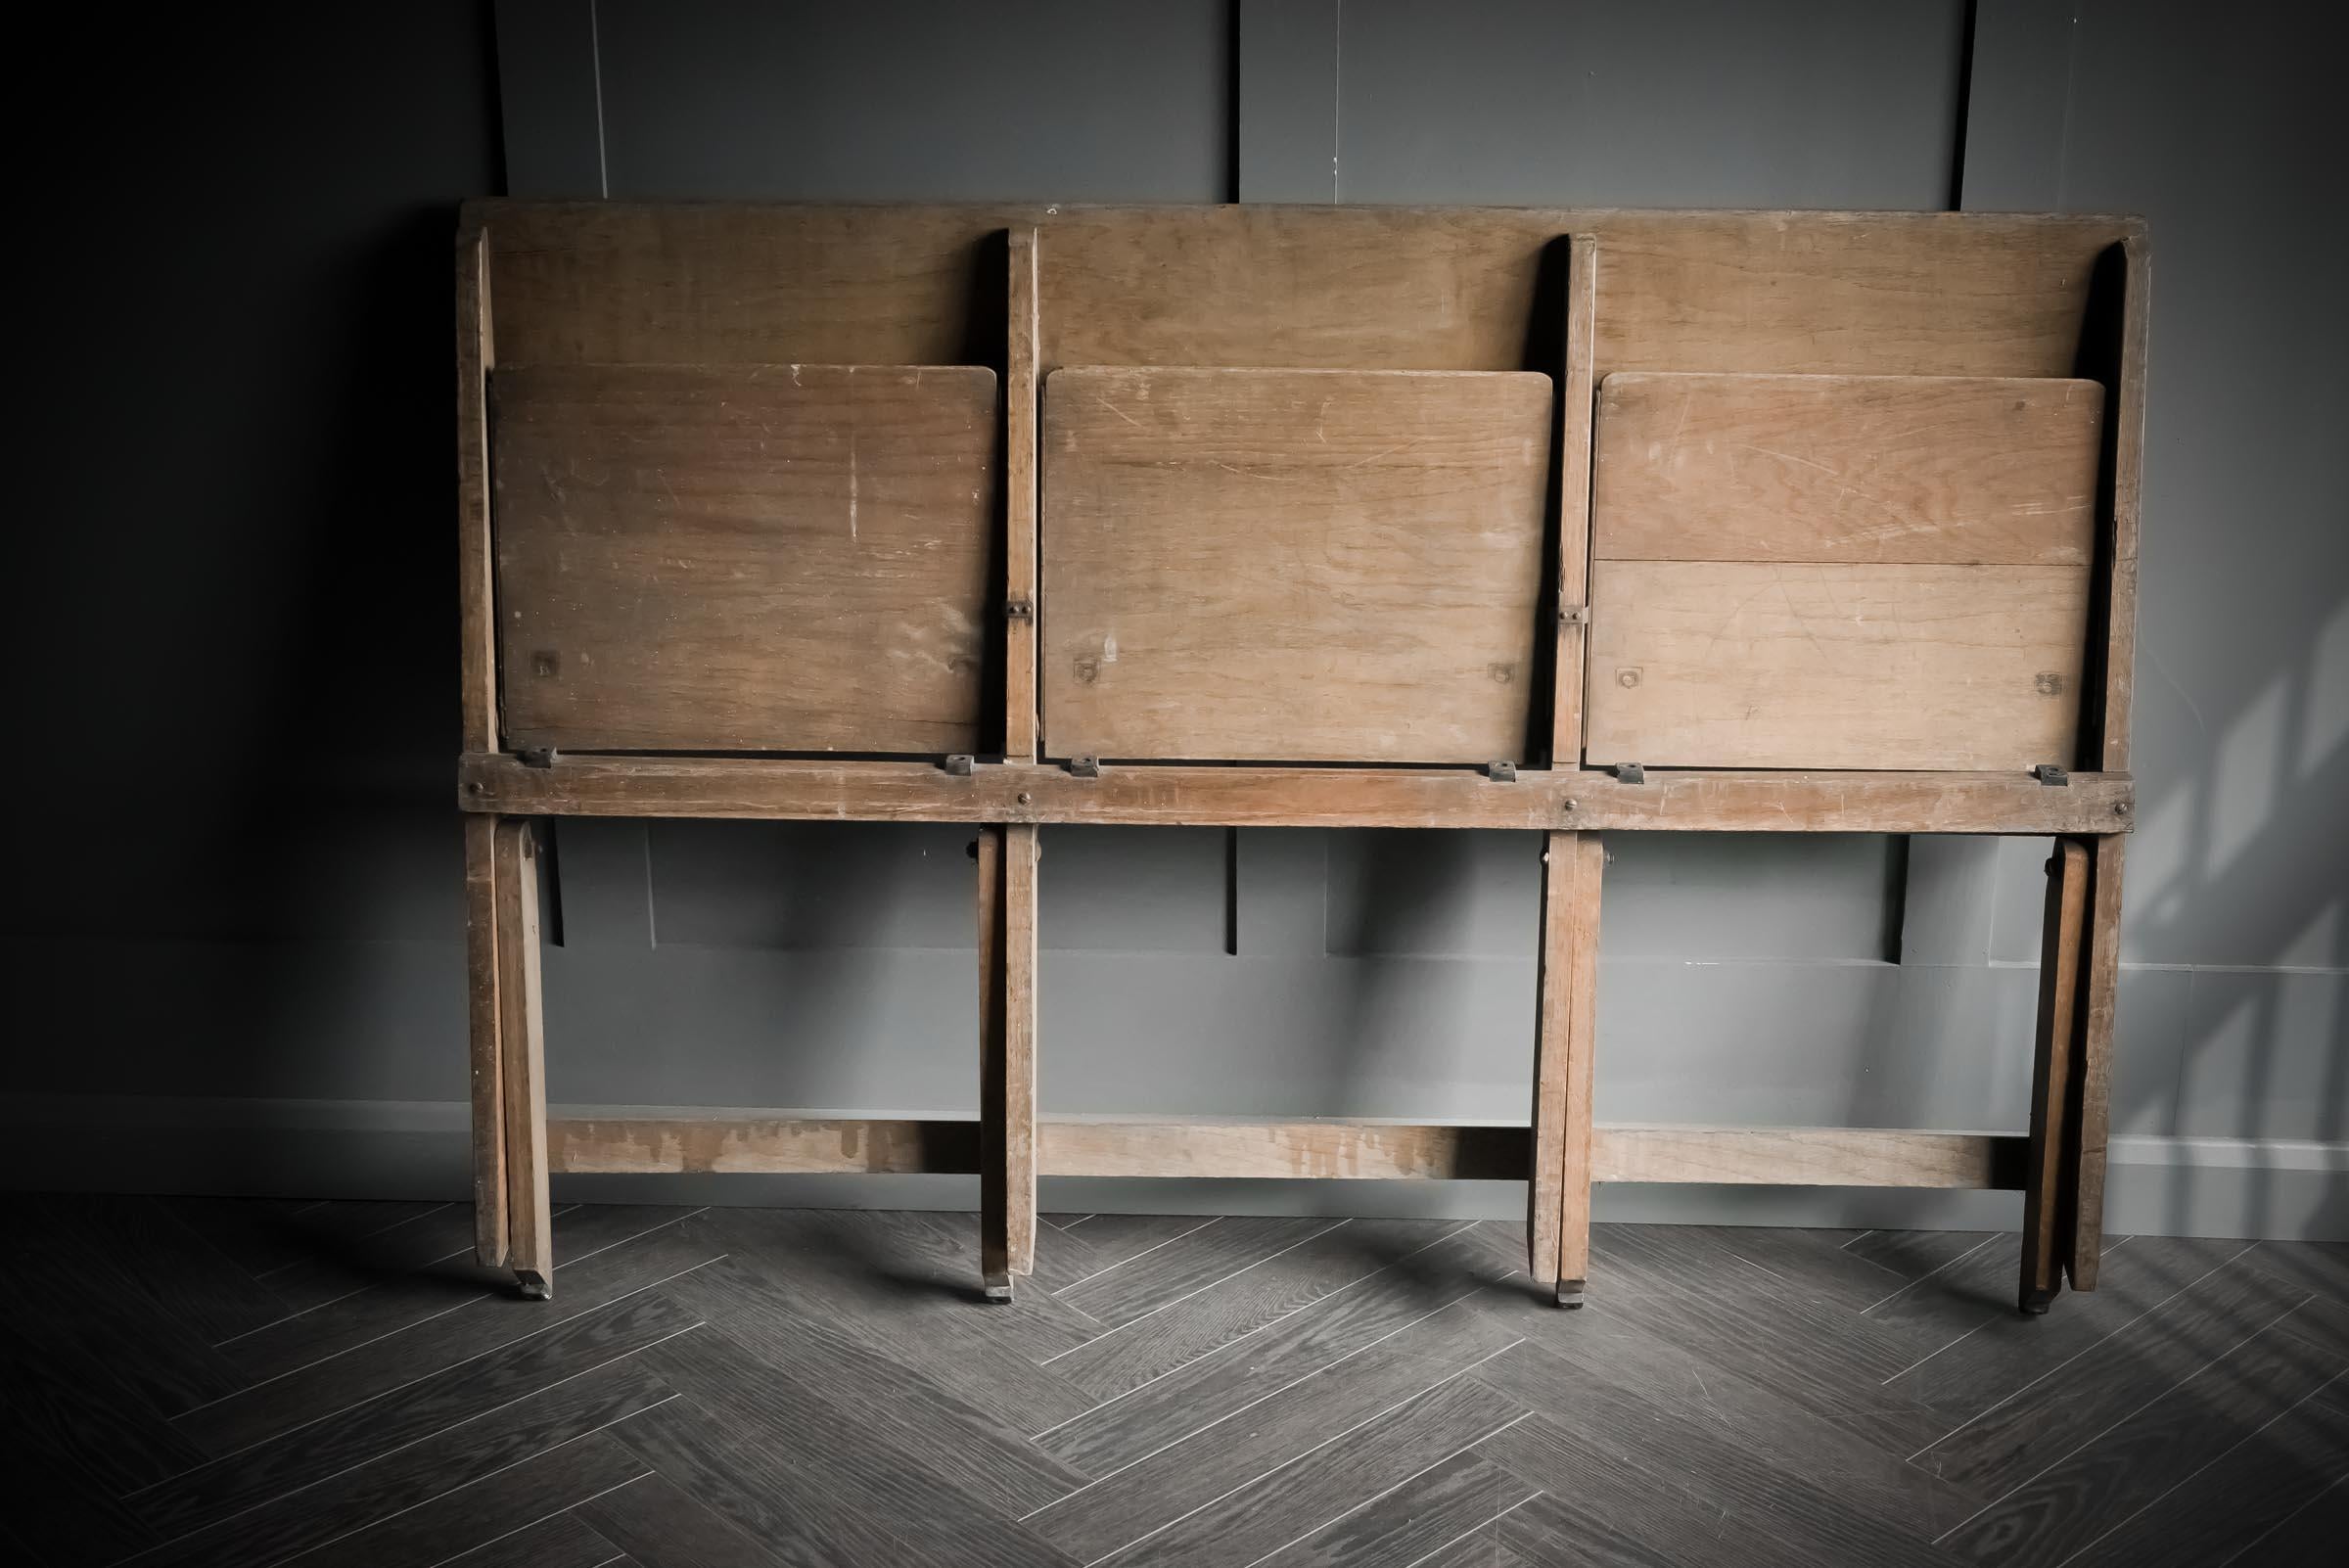 Trio of norfolk folding benches made in solid wood, C.1930.